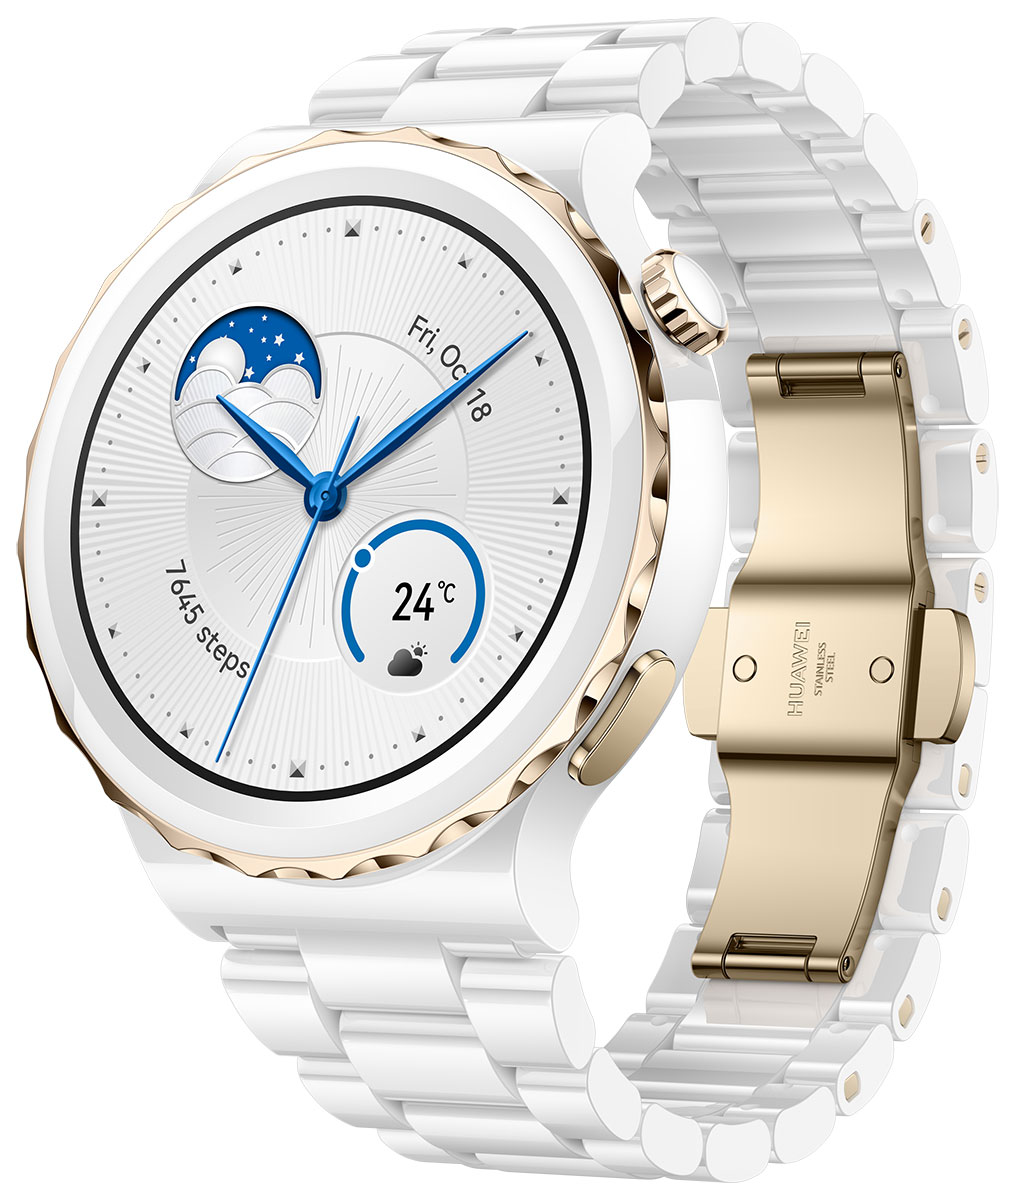 HUAWEI WATCH GT3 PRO 43MM WHITE CERAMIC WITH WHITE CERAMIC STRAP 55028824 